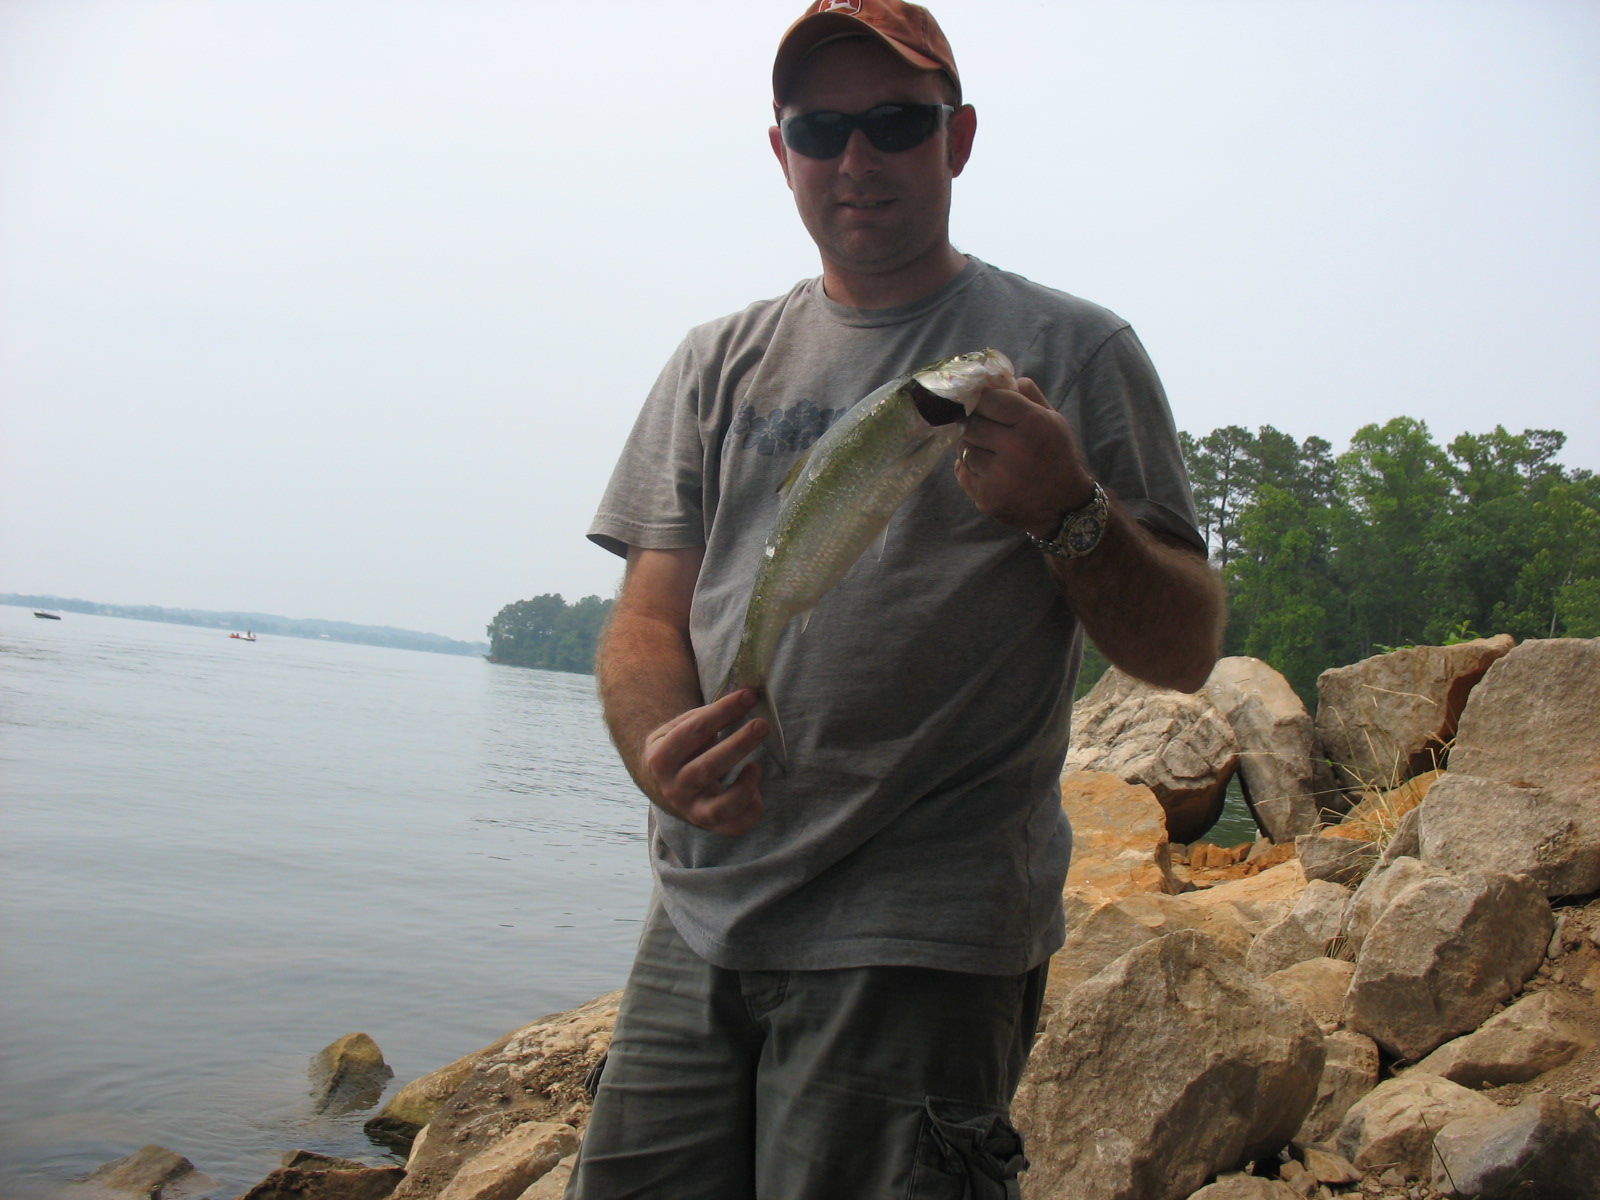 man in gray shirt holding a fish next to the water